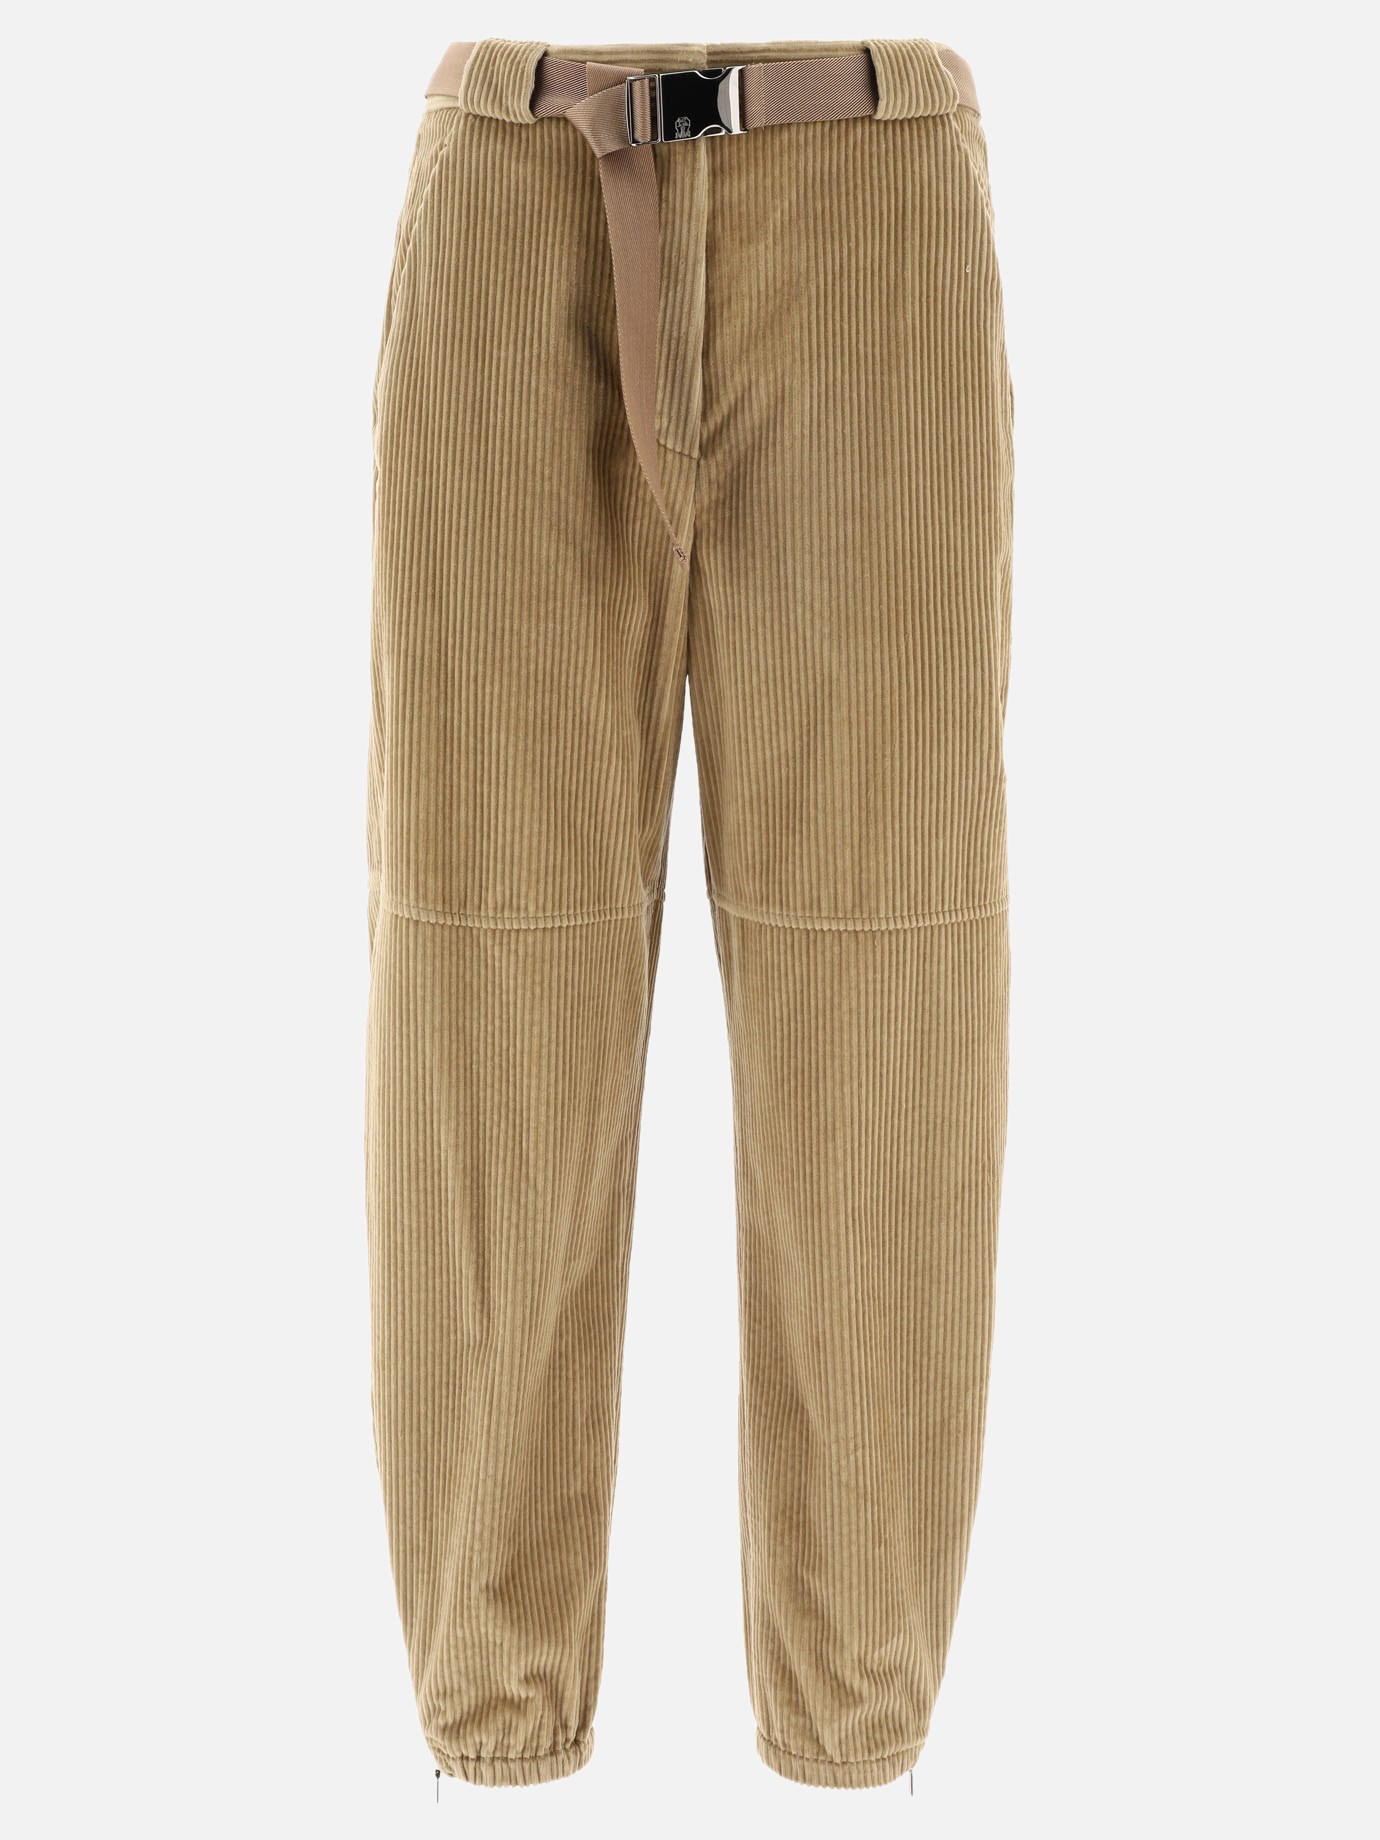 Corduroy trousers with belt